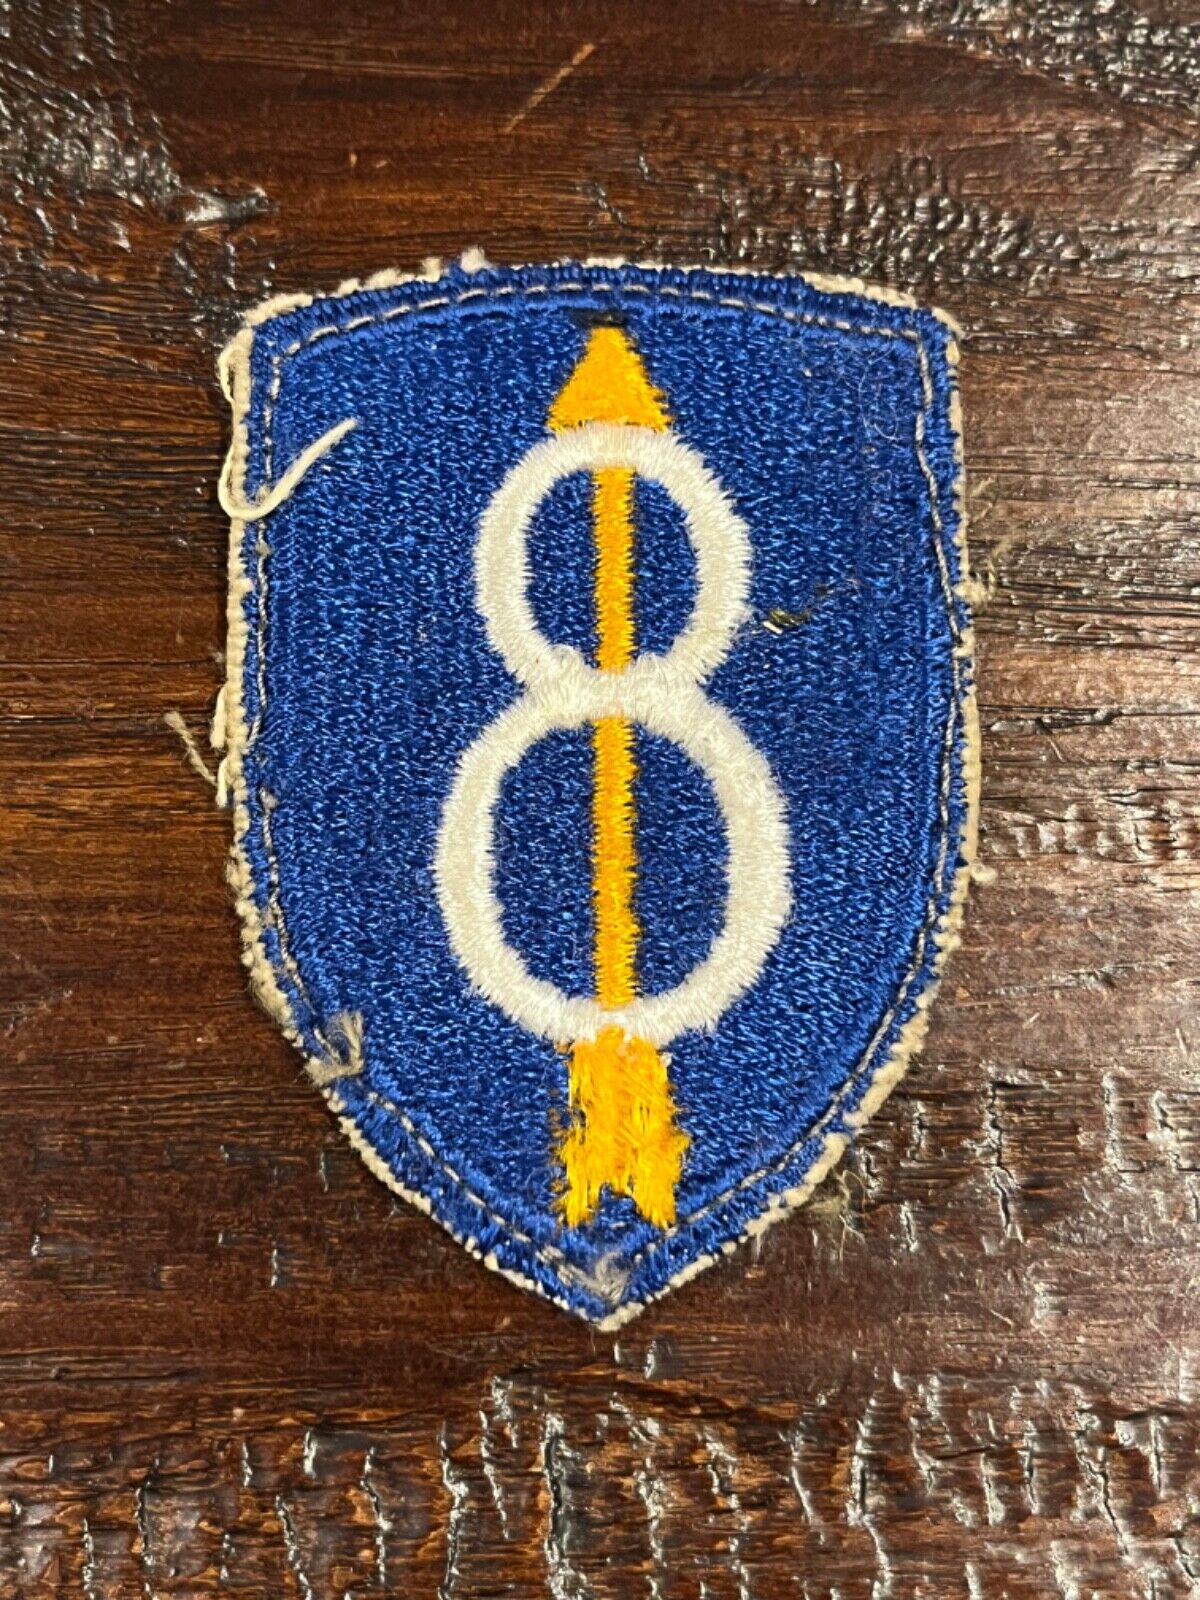 WWII WW2 US ARMY 8TH INFANTRY DIVISION PATCH- UNIFORM REMOVED FE CE